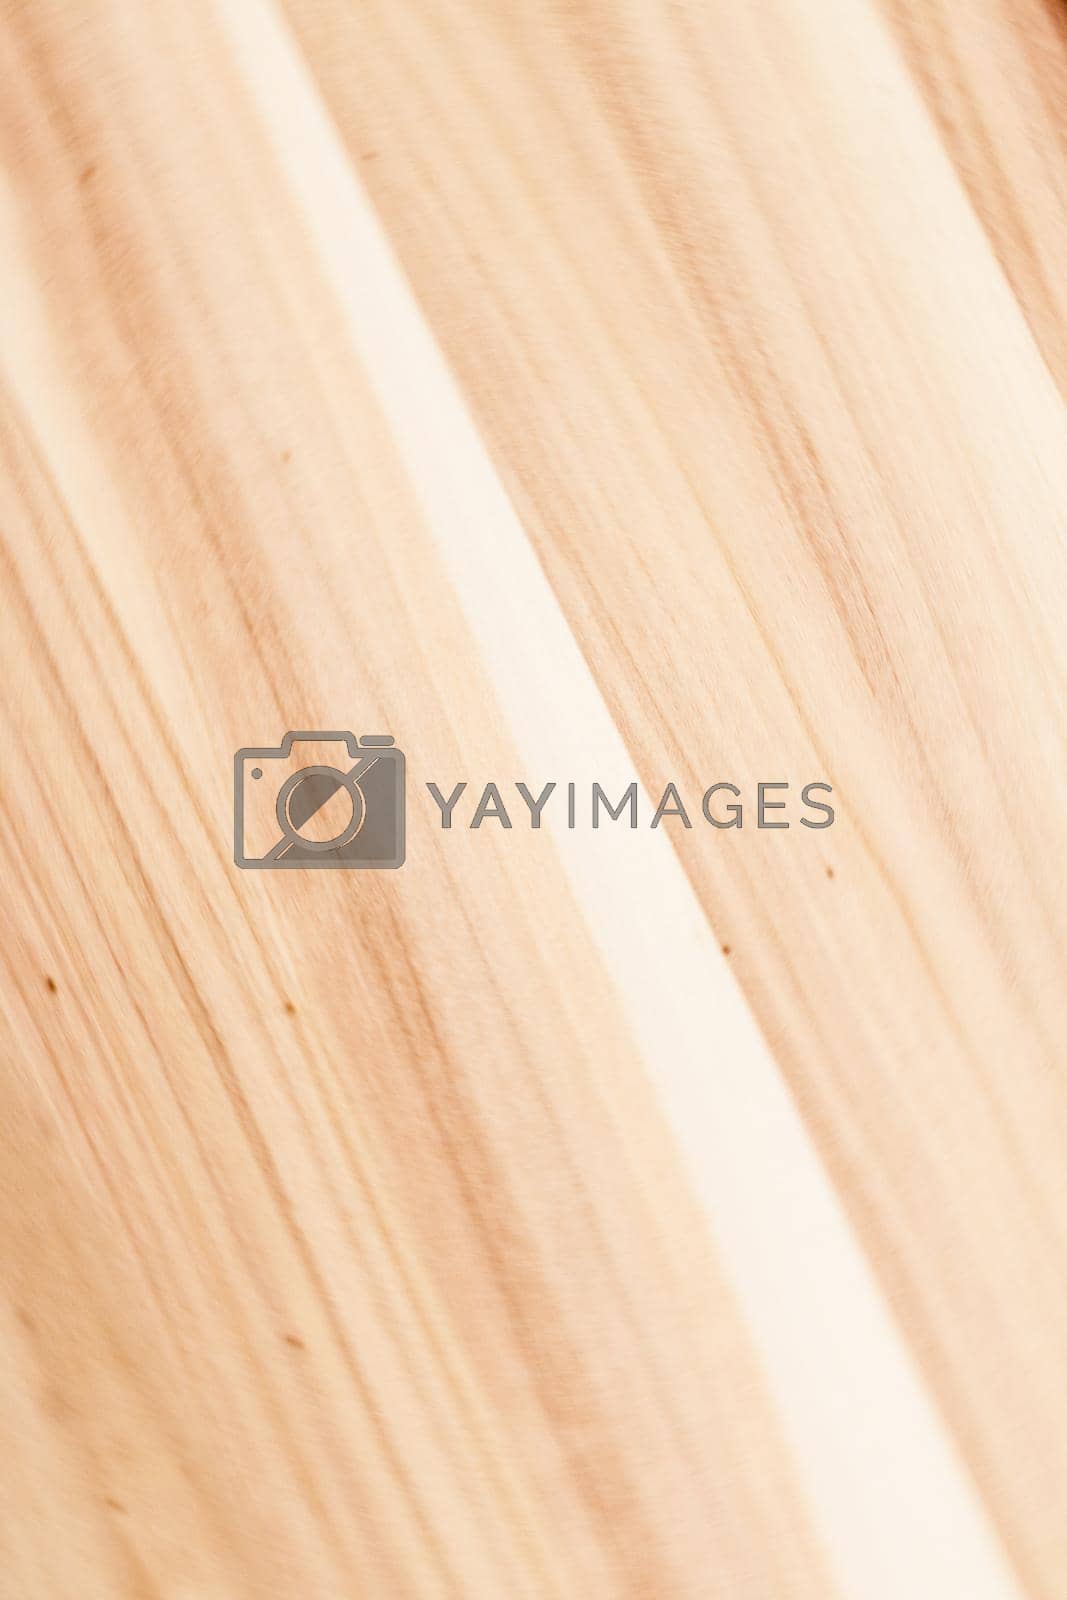 Royalty free image of Wooden plank textured background by Anneleven